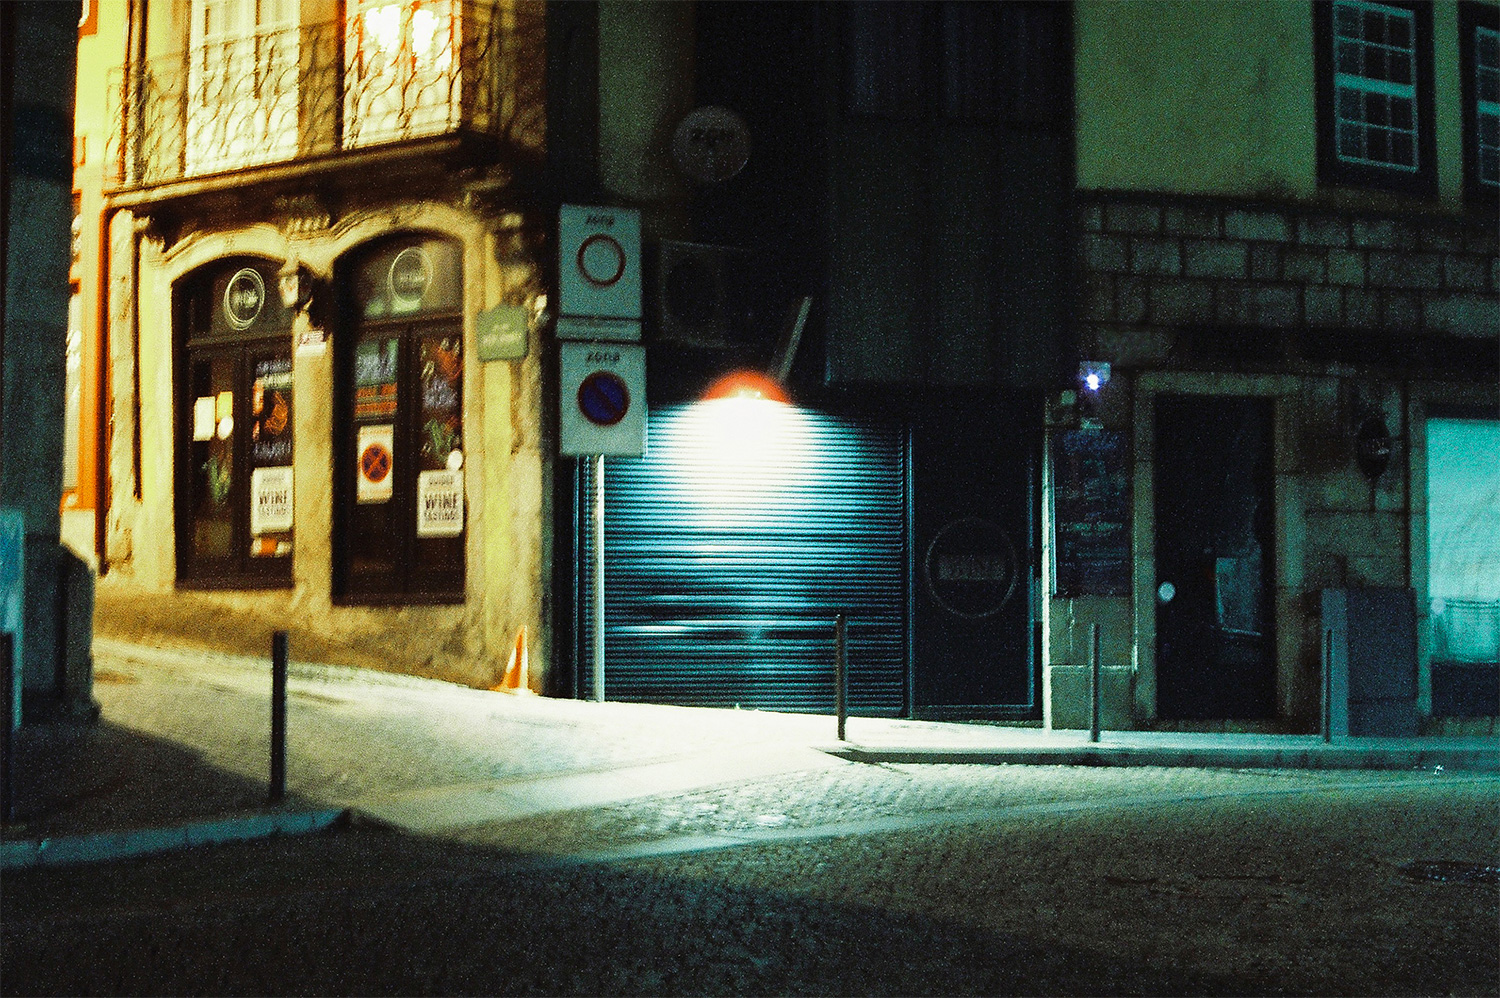 Analog photo of a closed store at night.